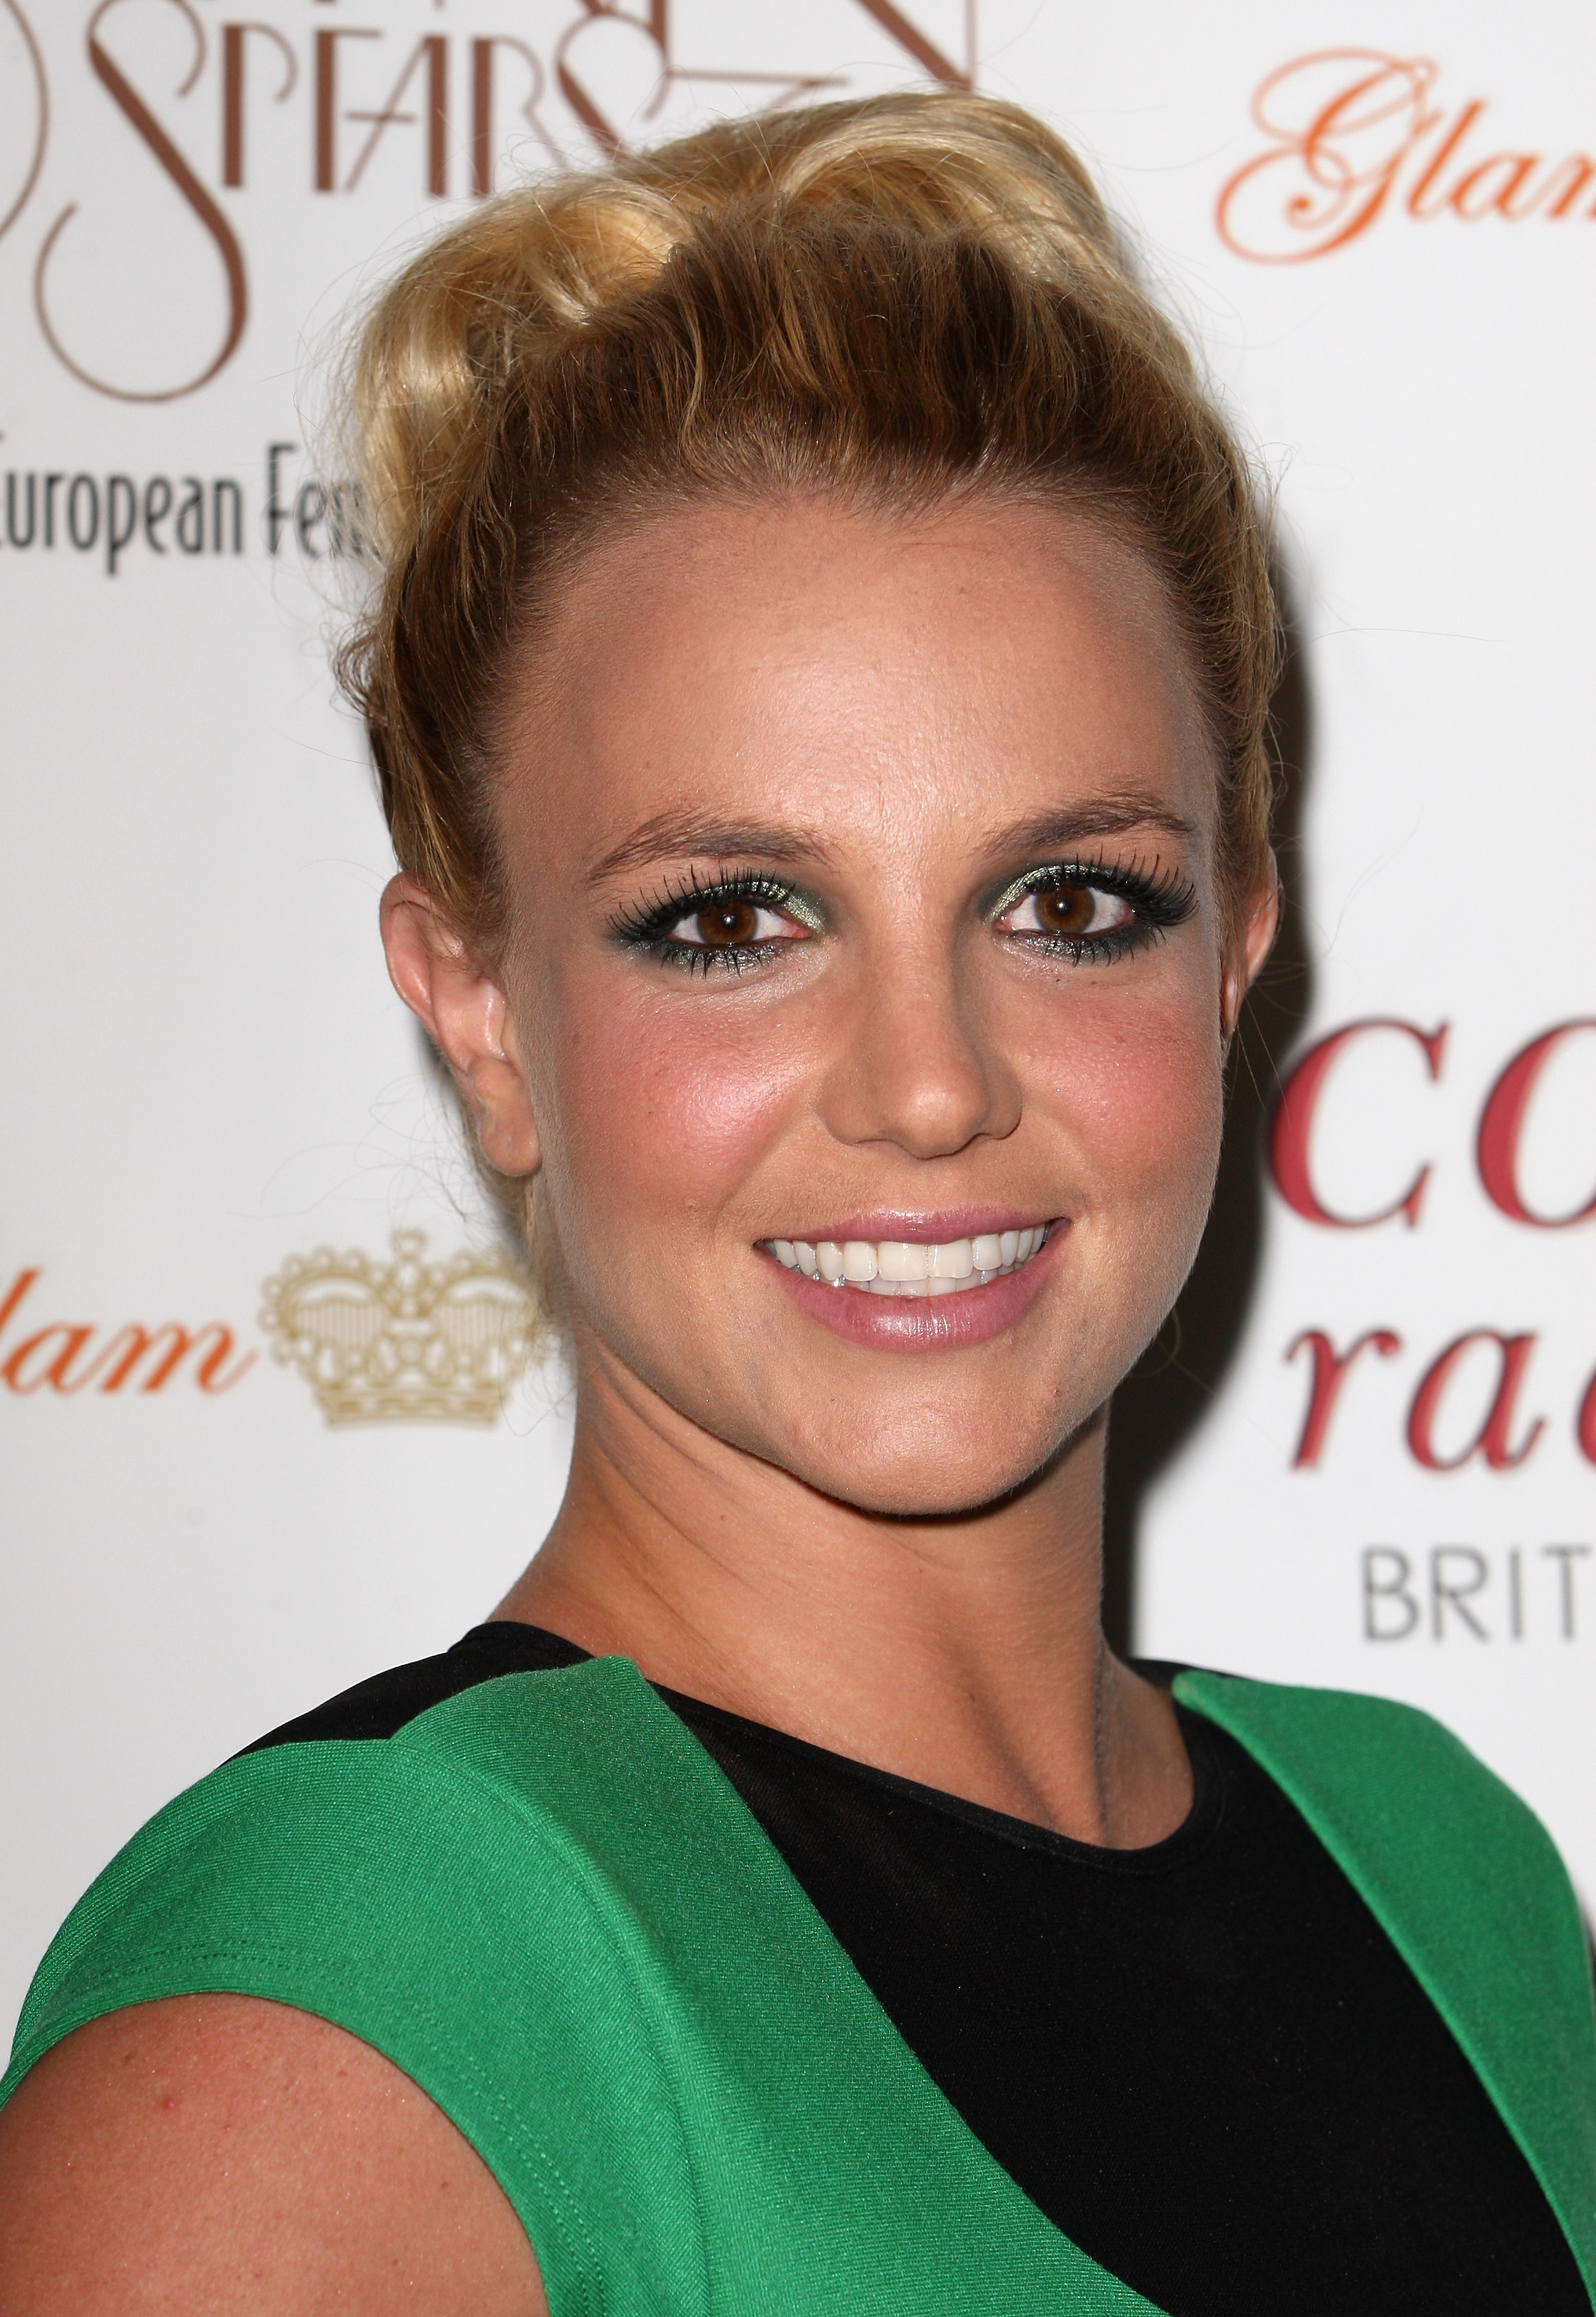 20 Britney Spears Eye Makeup Looks That Are Completely Intoxicating